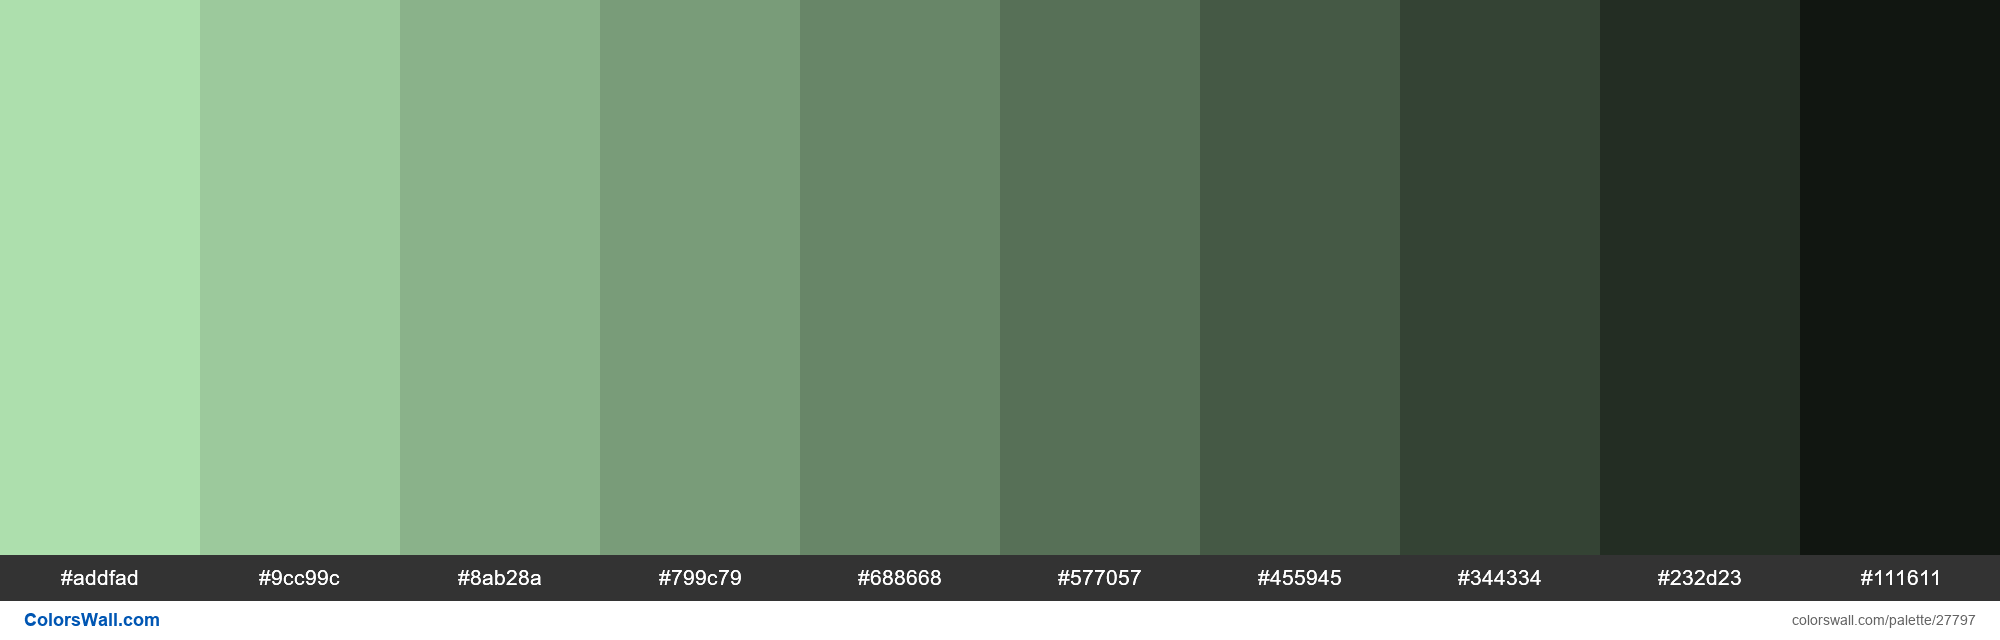 colorswall on X: Shades of Moss Green color #ADDFAD hex #addfad, #9cc99c,  #8ab28a, #799c79, #688668, #577057, #455945, #344334, #232d23, #111611  #colors #palette   / X